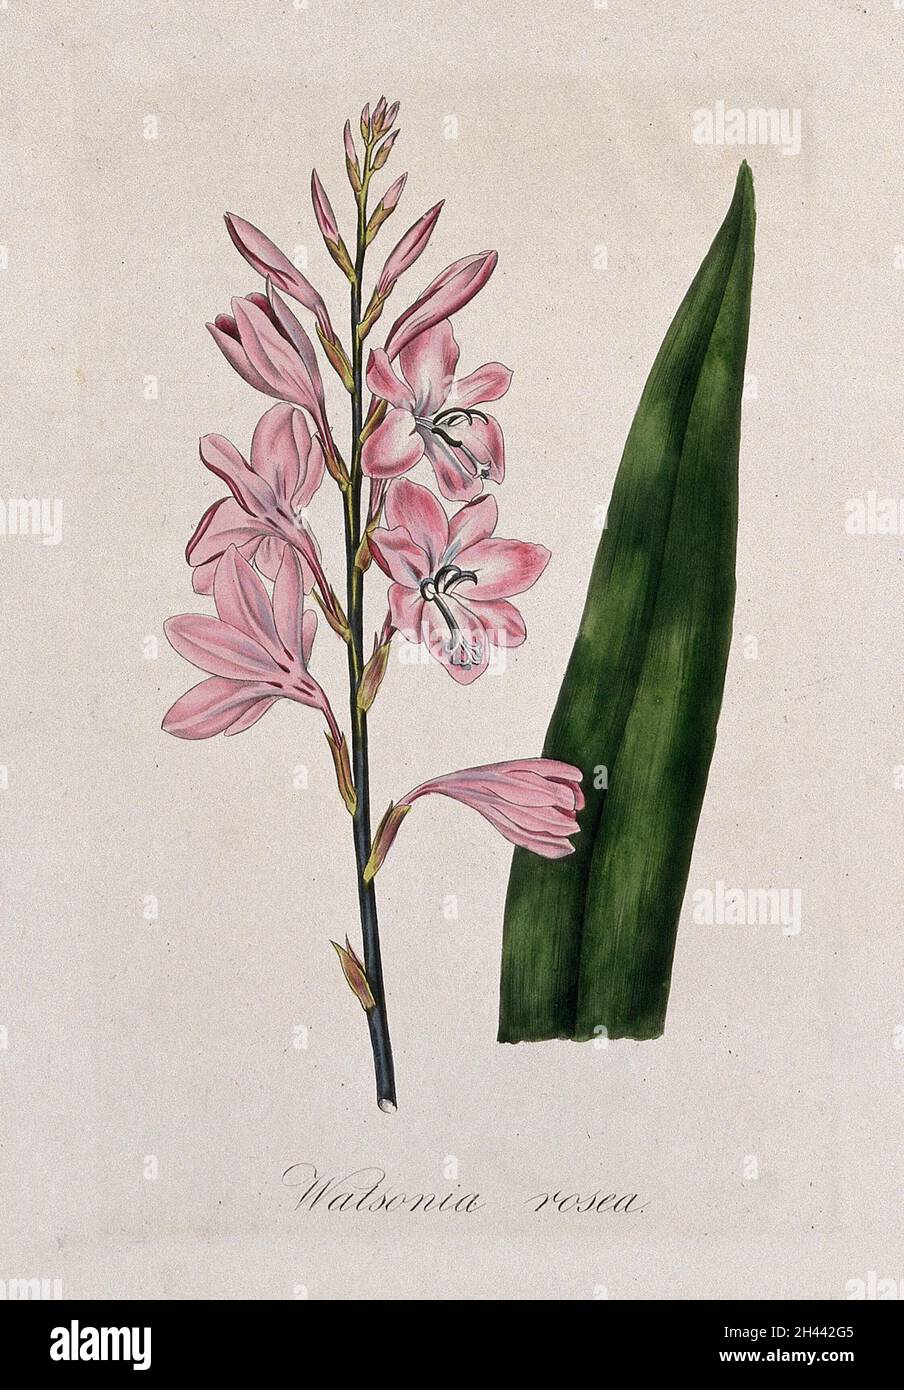 A plant (Watsonia rosea): flowering stem and leaf. Coloured lithograph. Stock Photo